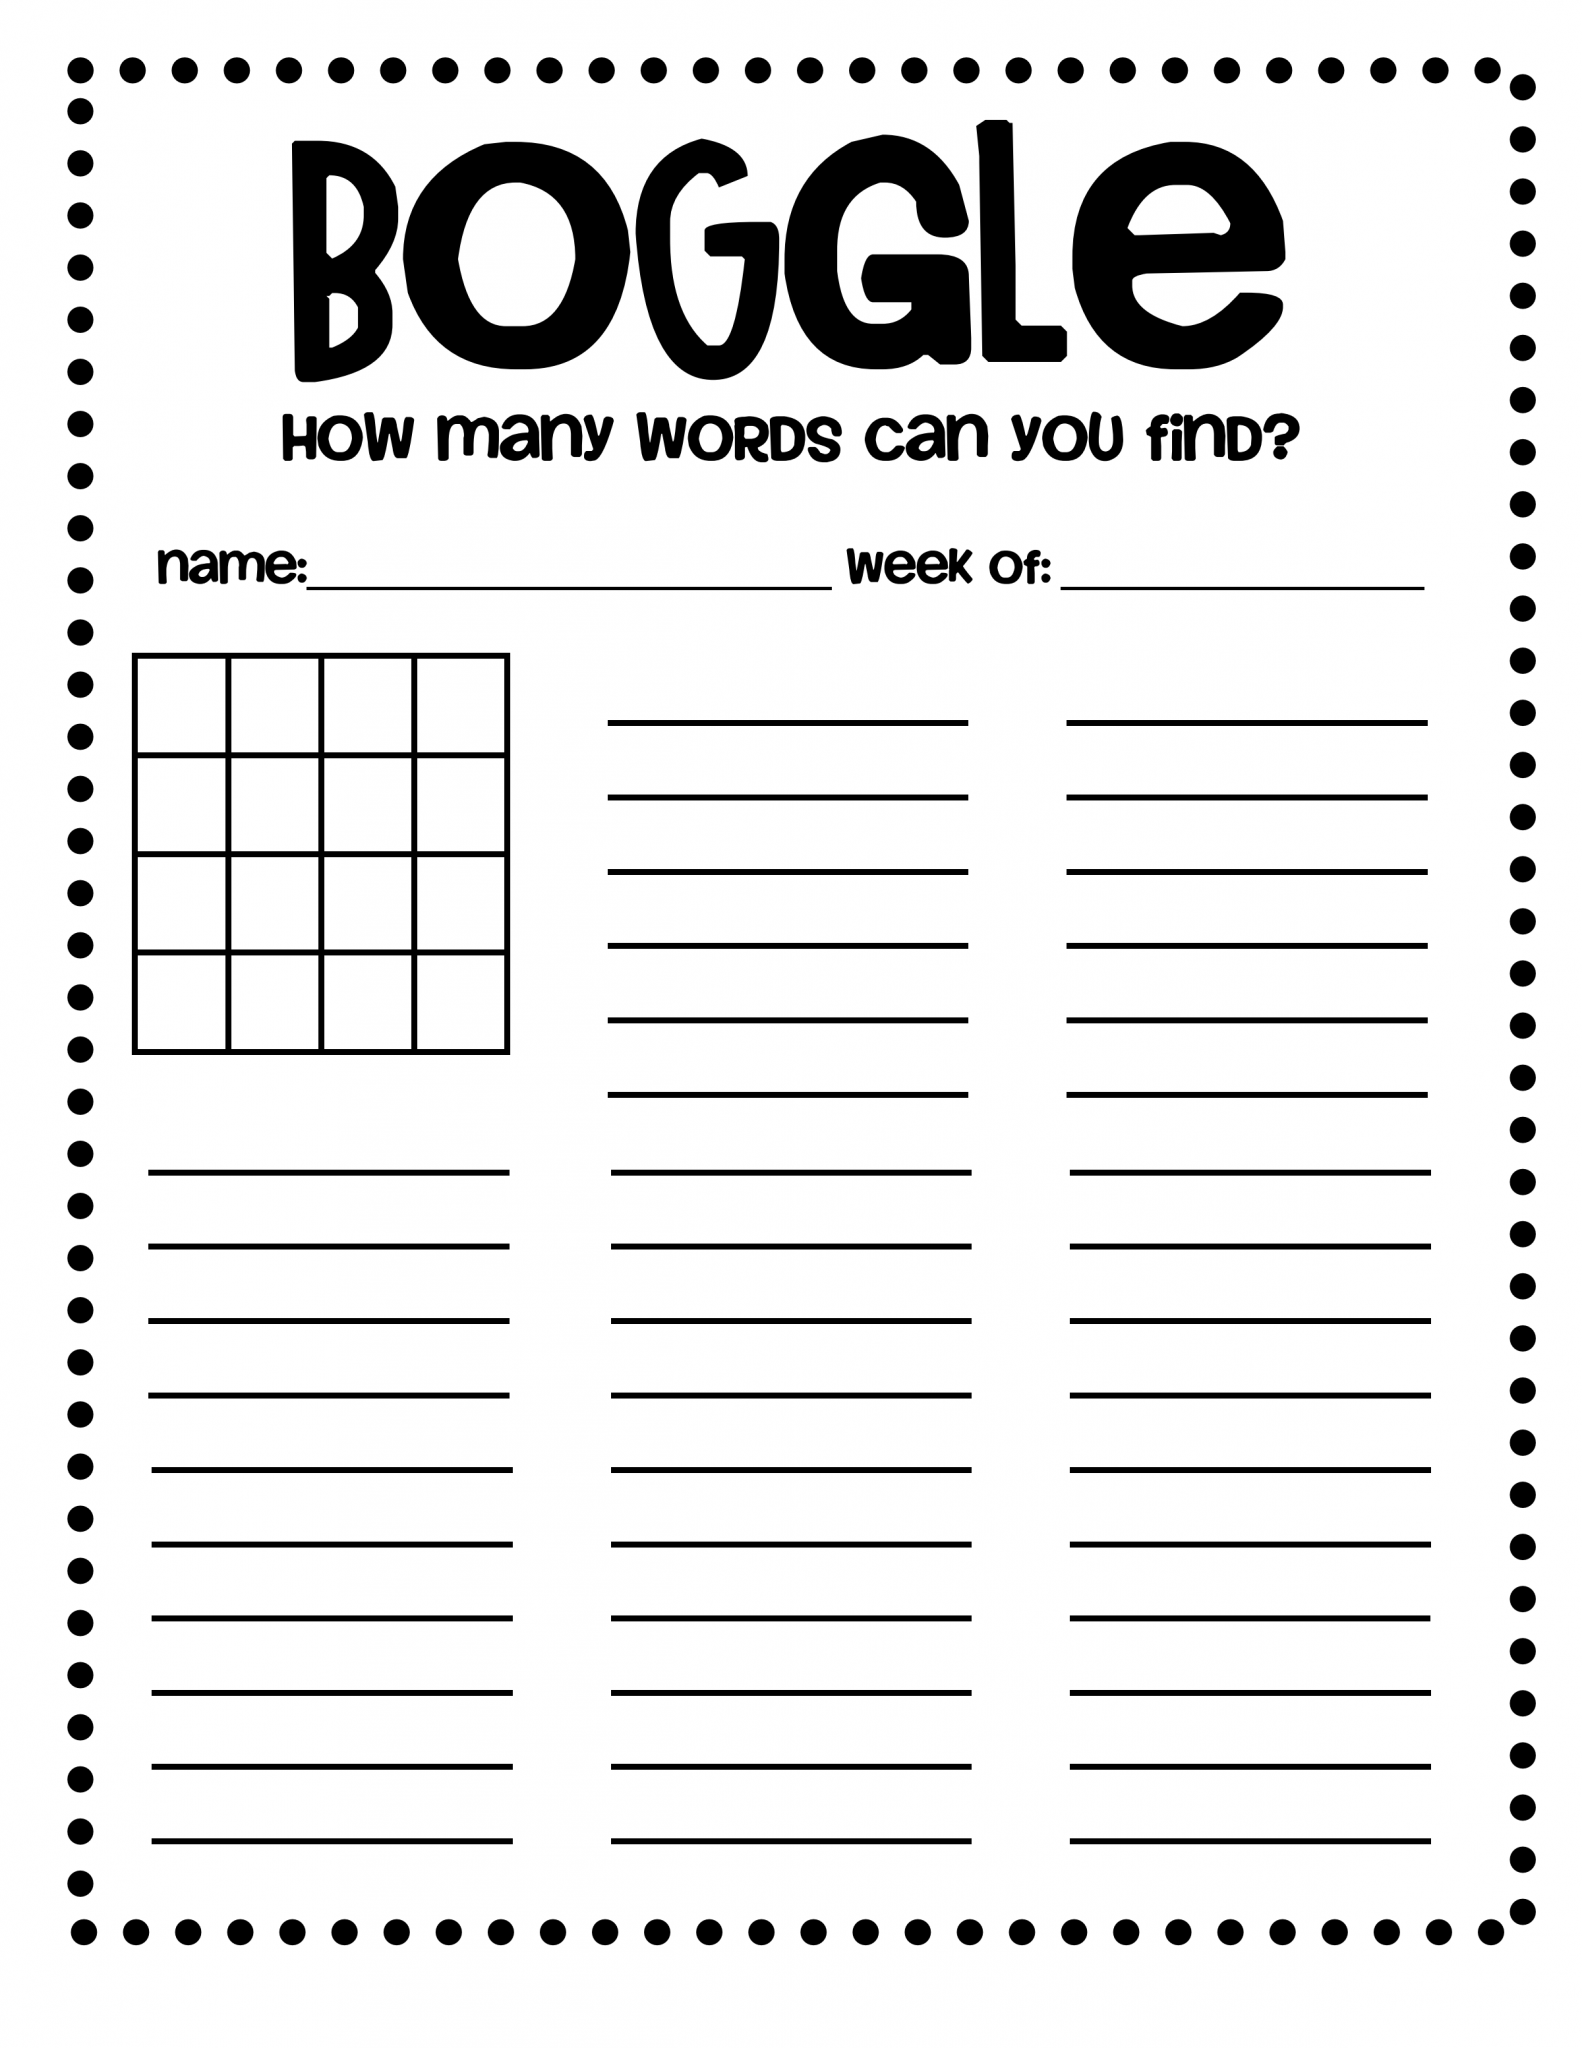 printable-boggle-word-game-k5-worksheets-boggle-critical-thinking-activities-word-games